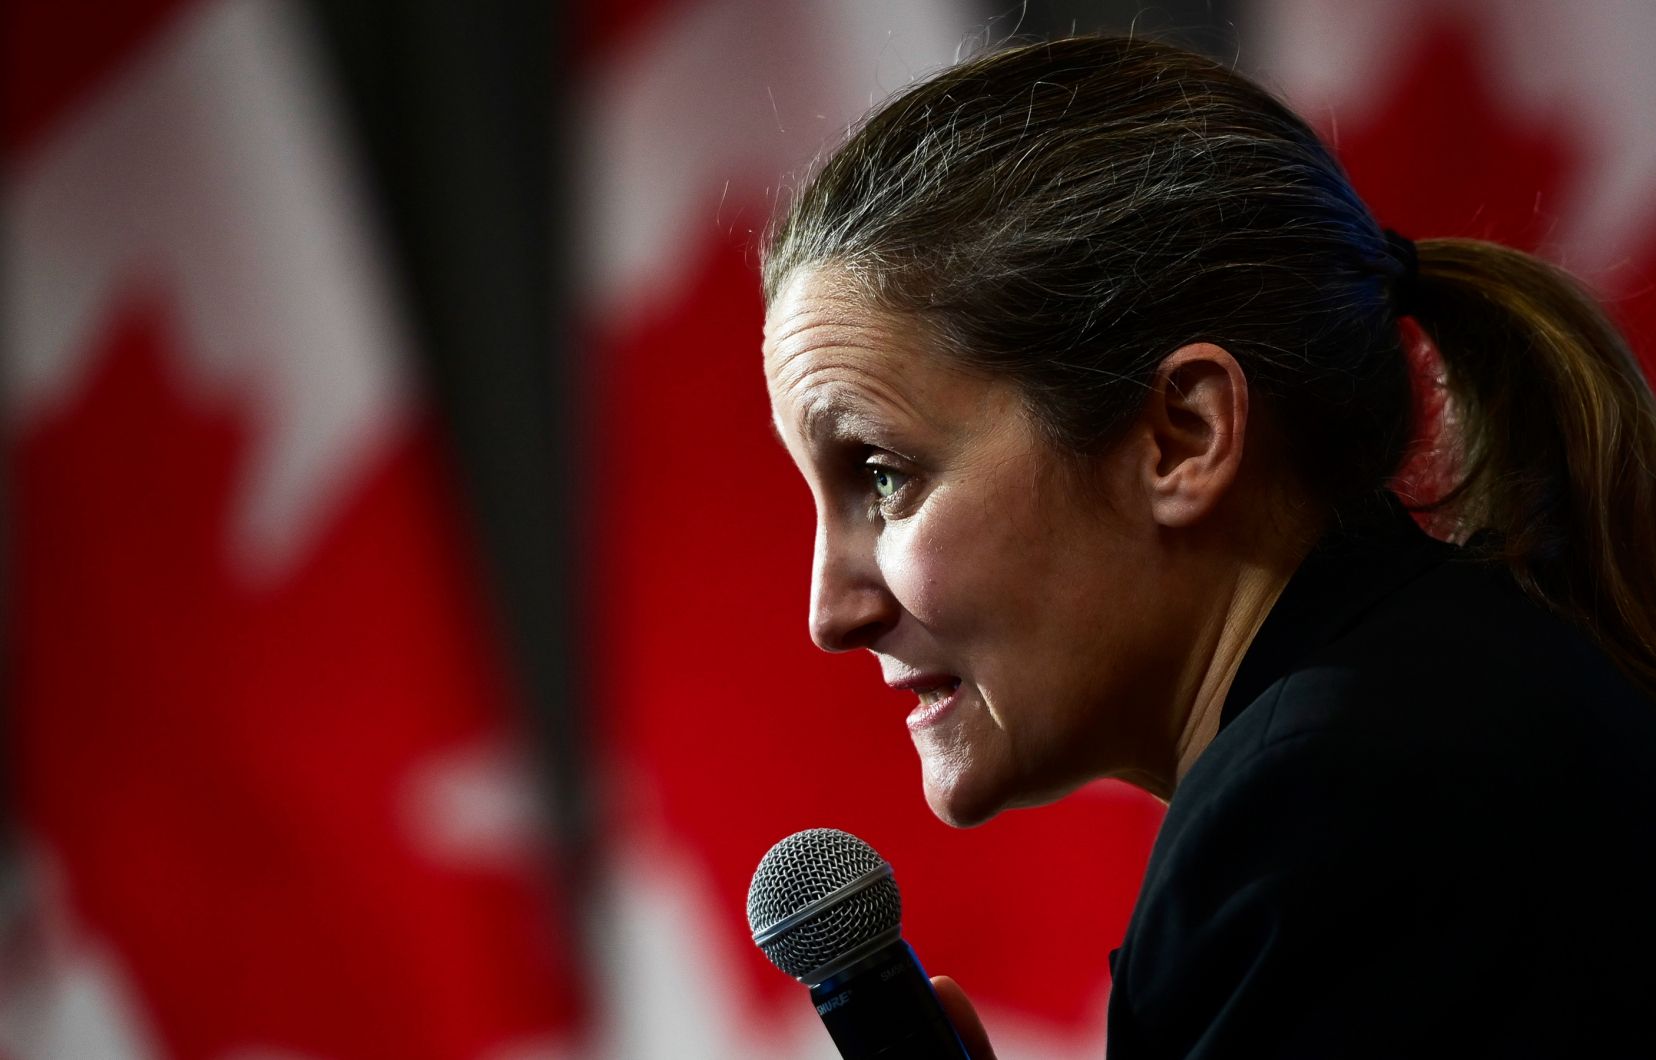 Air travel: Chrystia Freeland disappointed with Air Canada rewards

